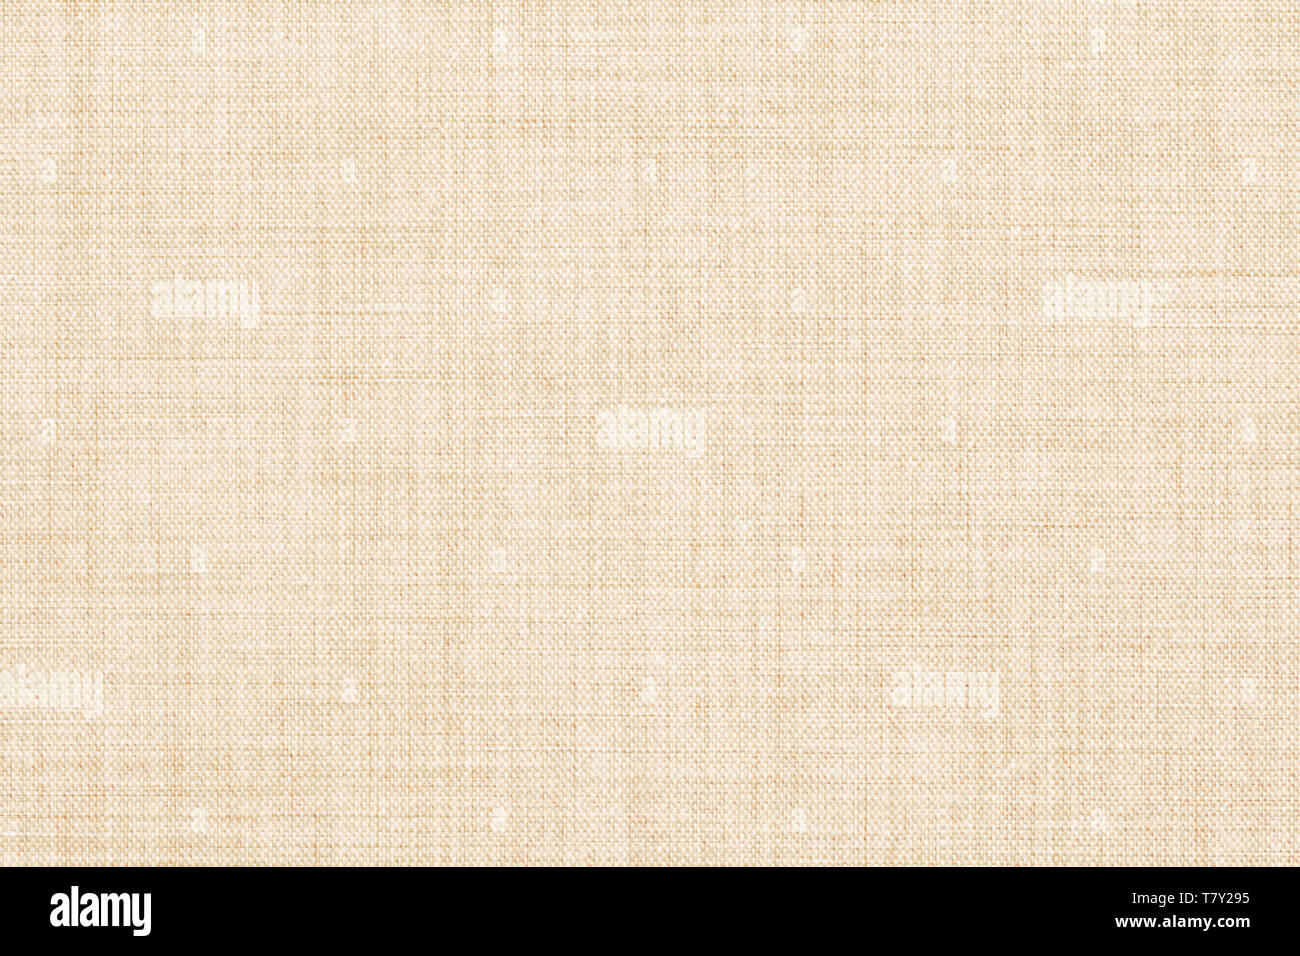 Beige colored seamless linen texture or fabric background Stock Photo -  Alamy